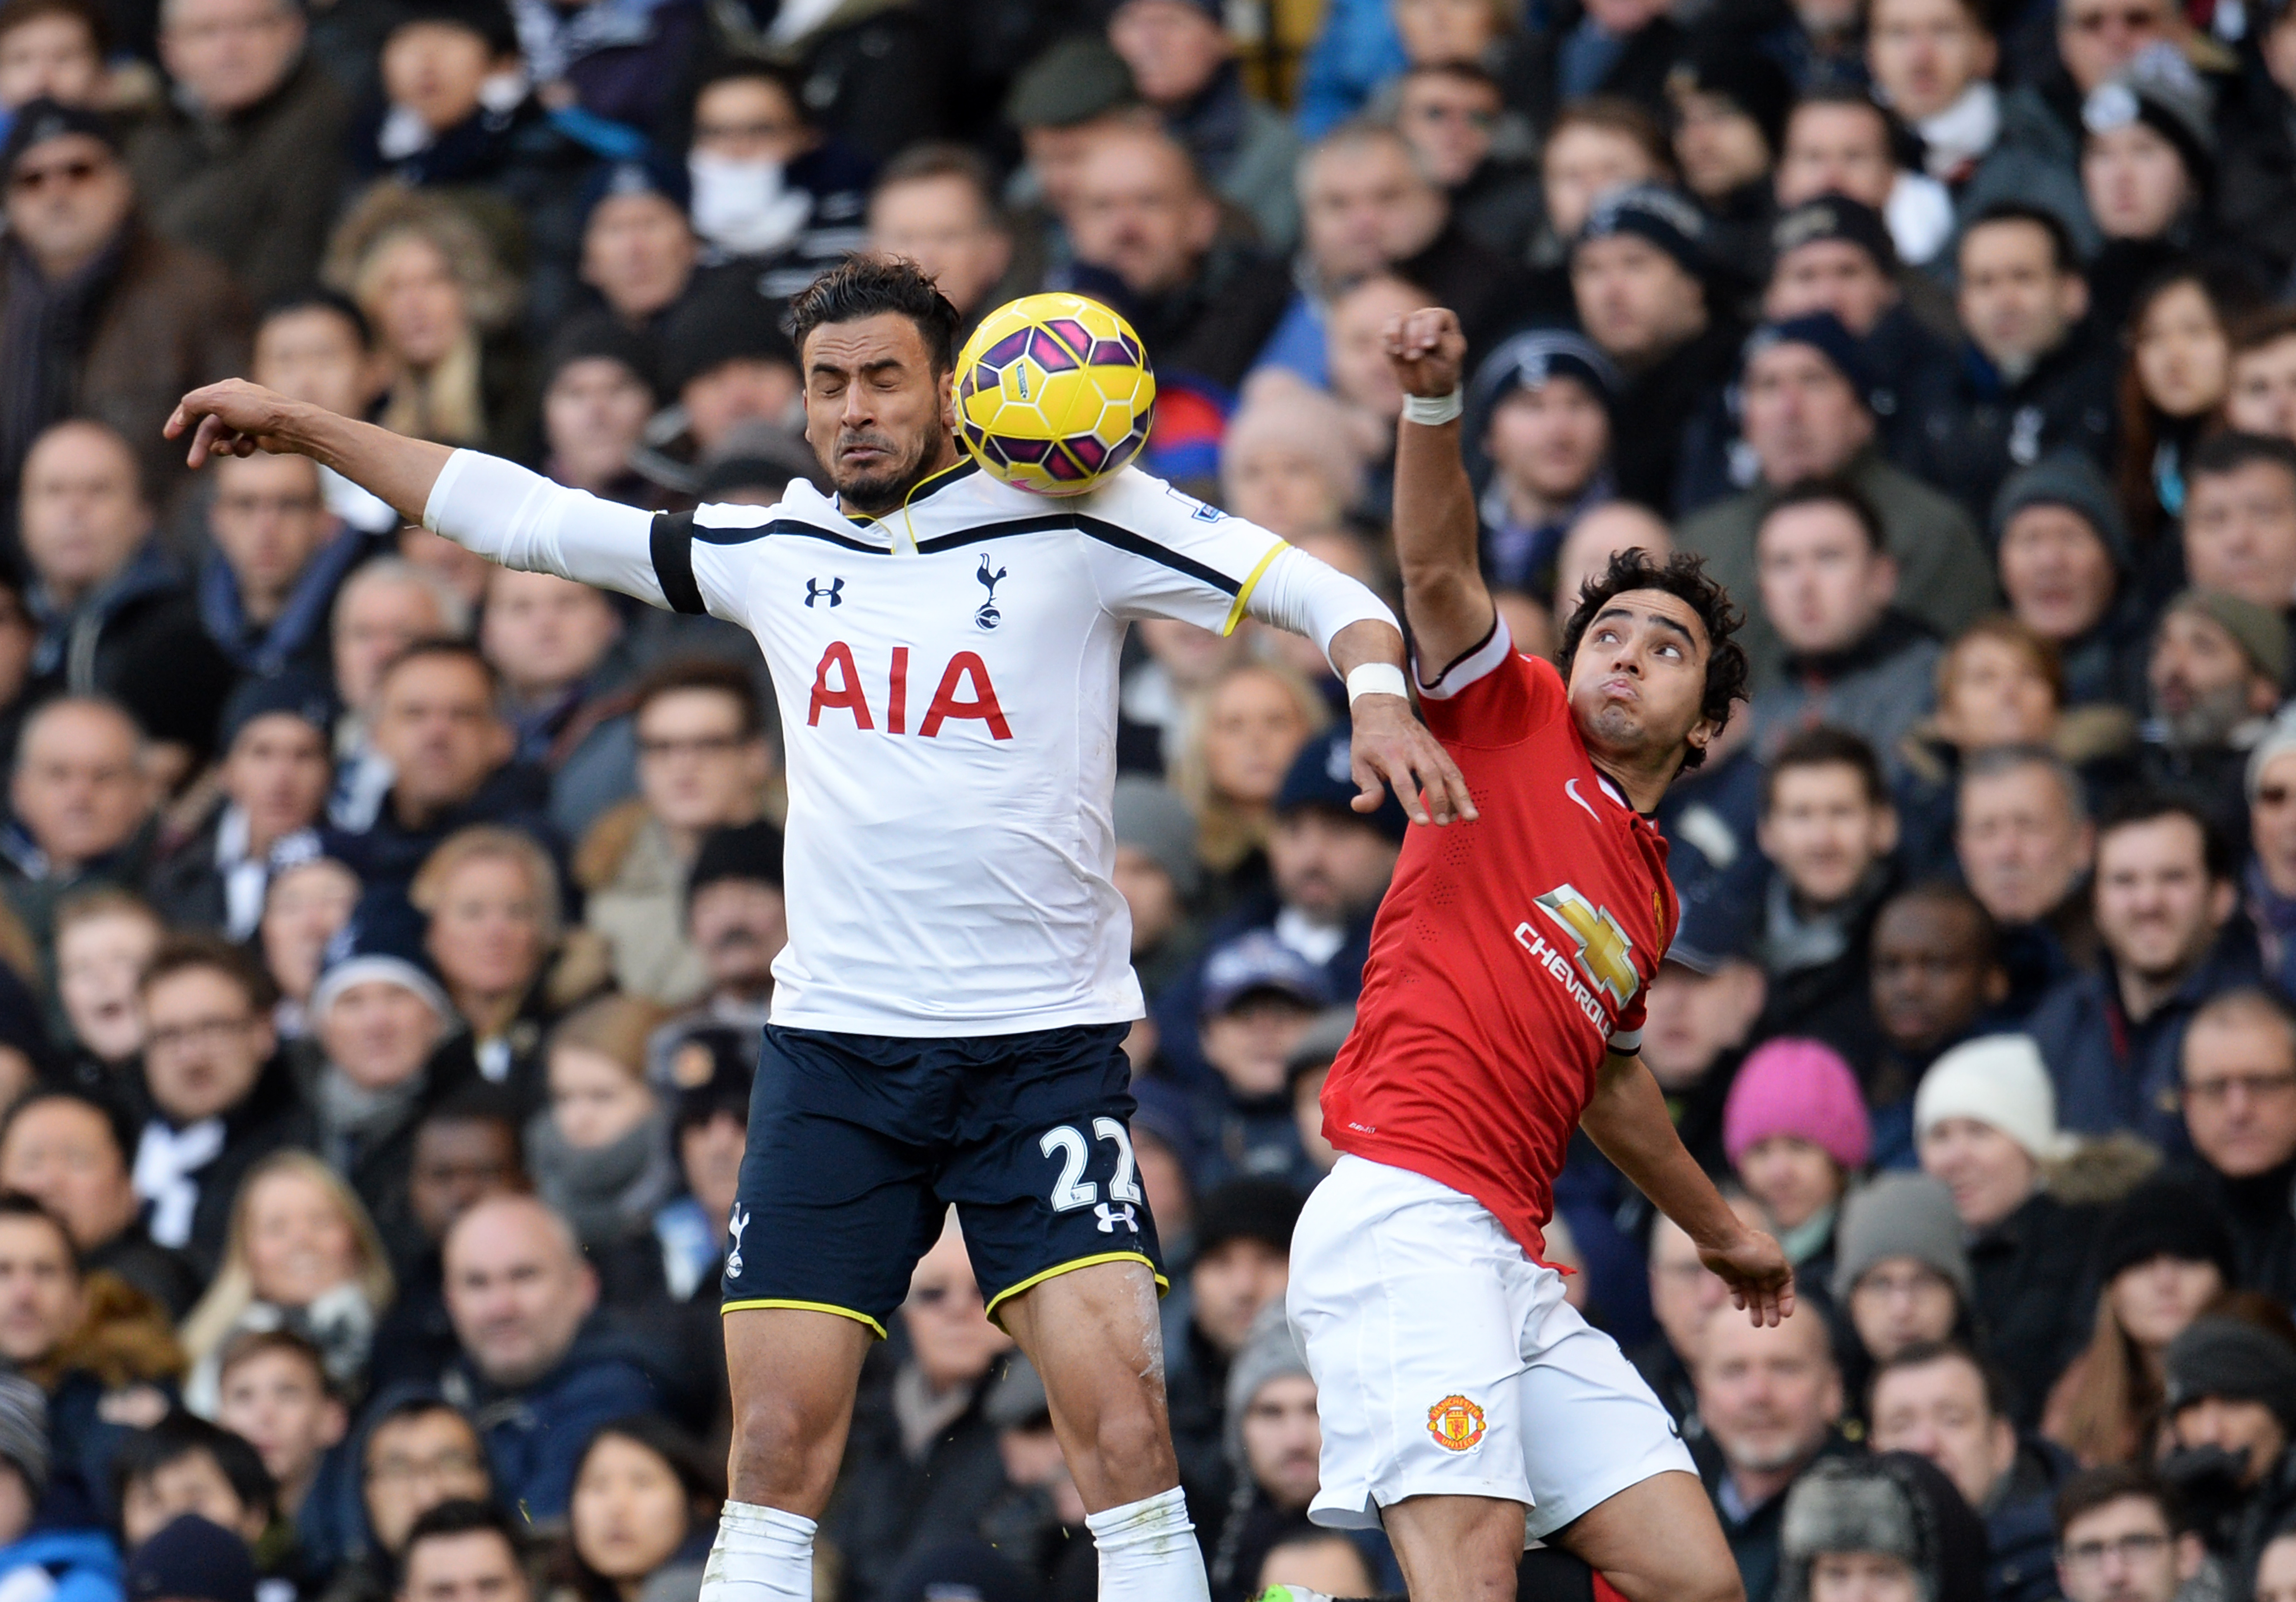 epa04541439 Manchester United Rafael Da Silva (R) vies for the ball with Tottenham's Nacer Chadli (L) during an English Premier League soccer match at White Hart Lane in London, Britain, 28 December 2014.  EPA/ANDY RAIN DataCo terms and conditions apply. http://www.epa.eu/downloads/DataCo-TCs.pdf